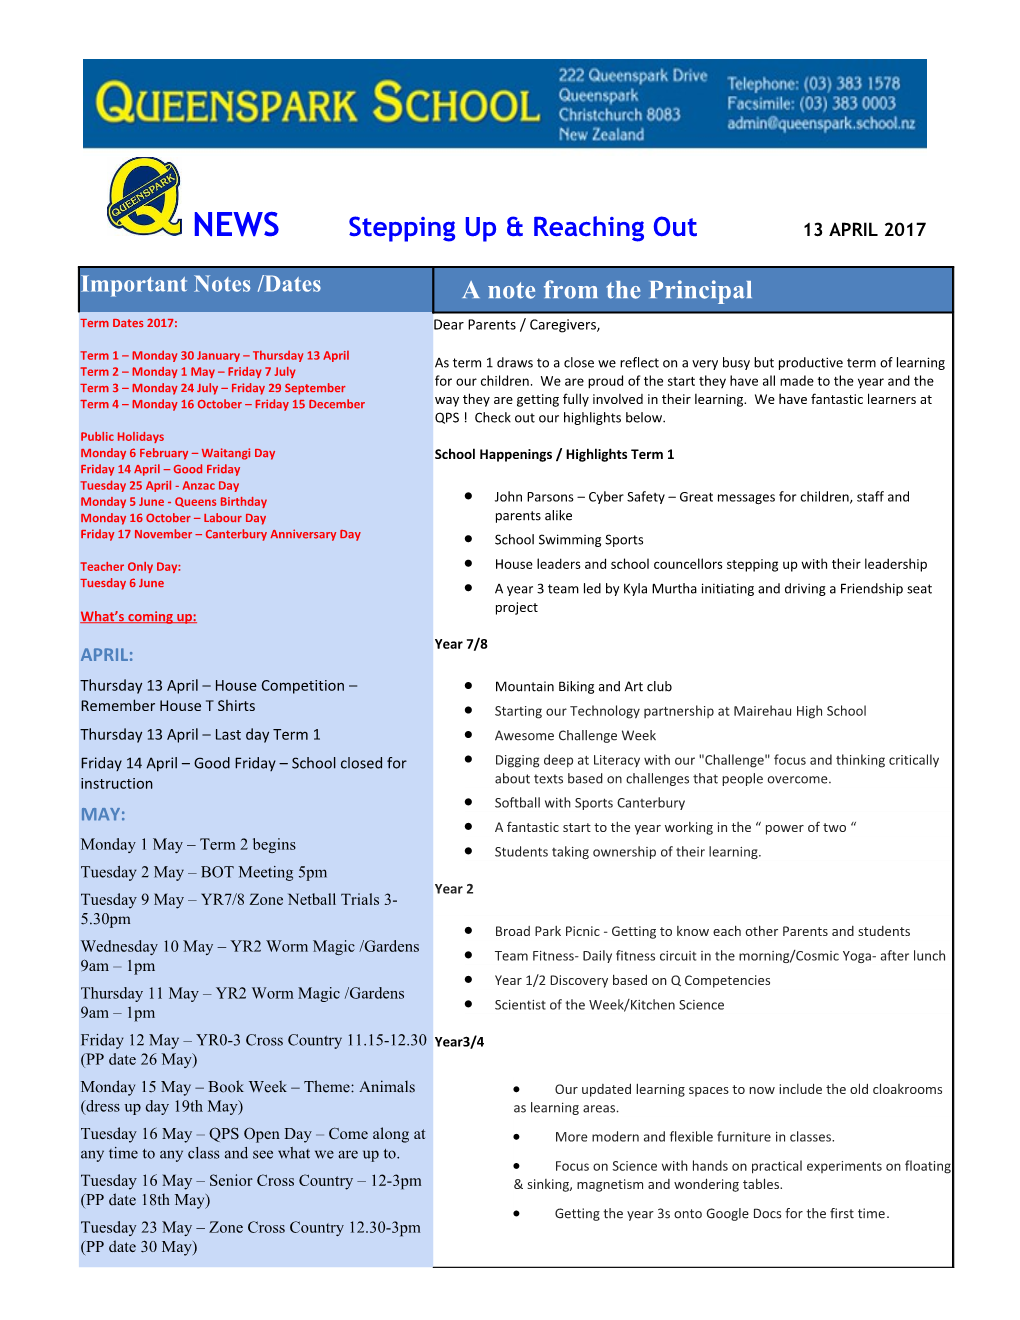 NEWS Stepping up & Reaching out 13 APRIL 2017